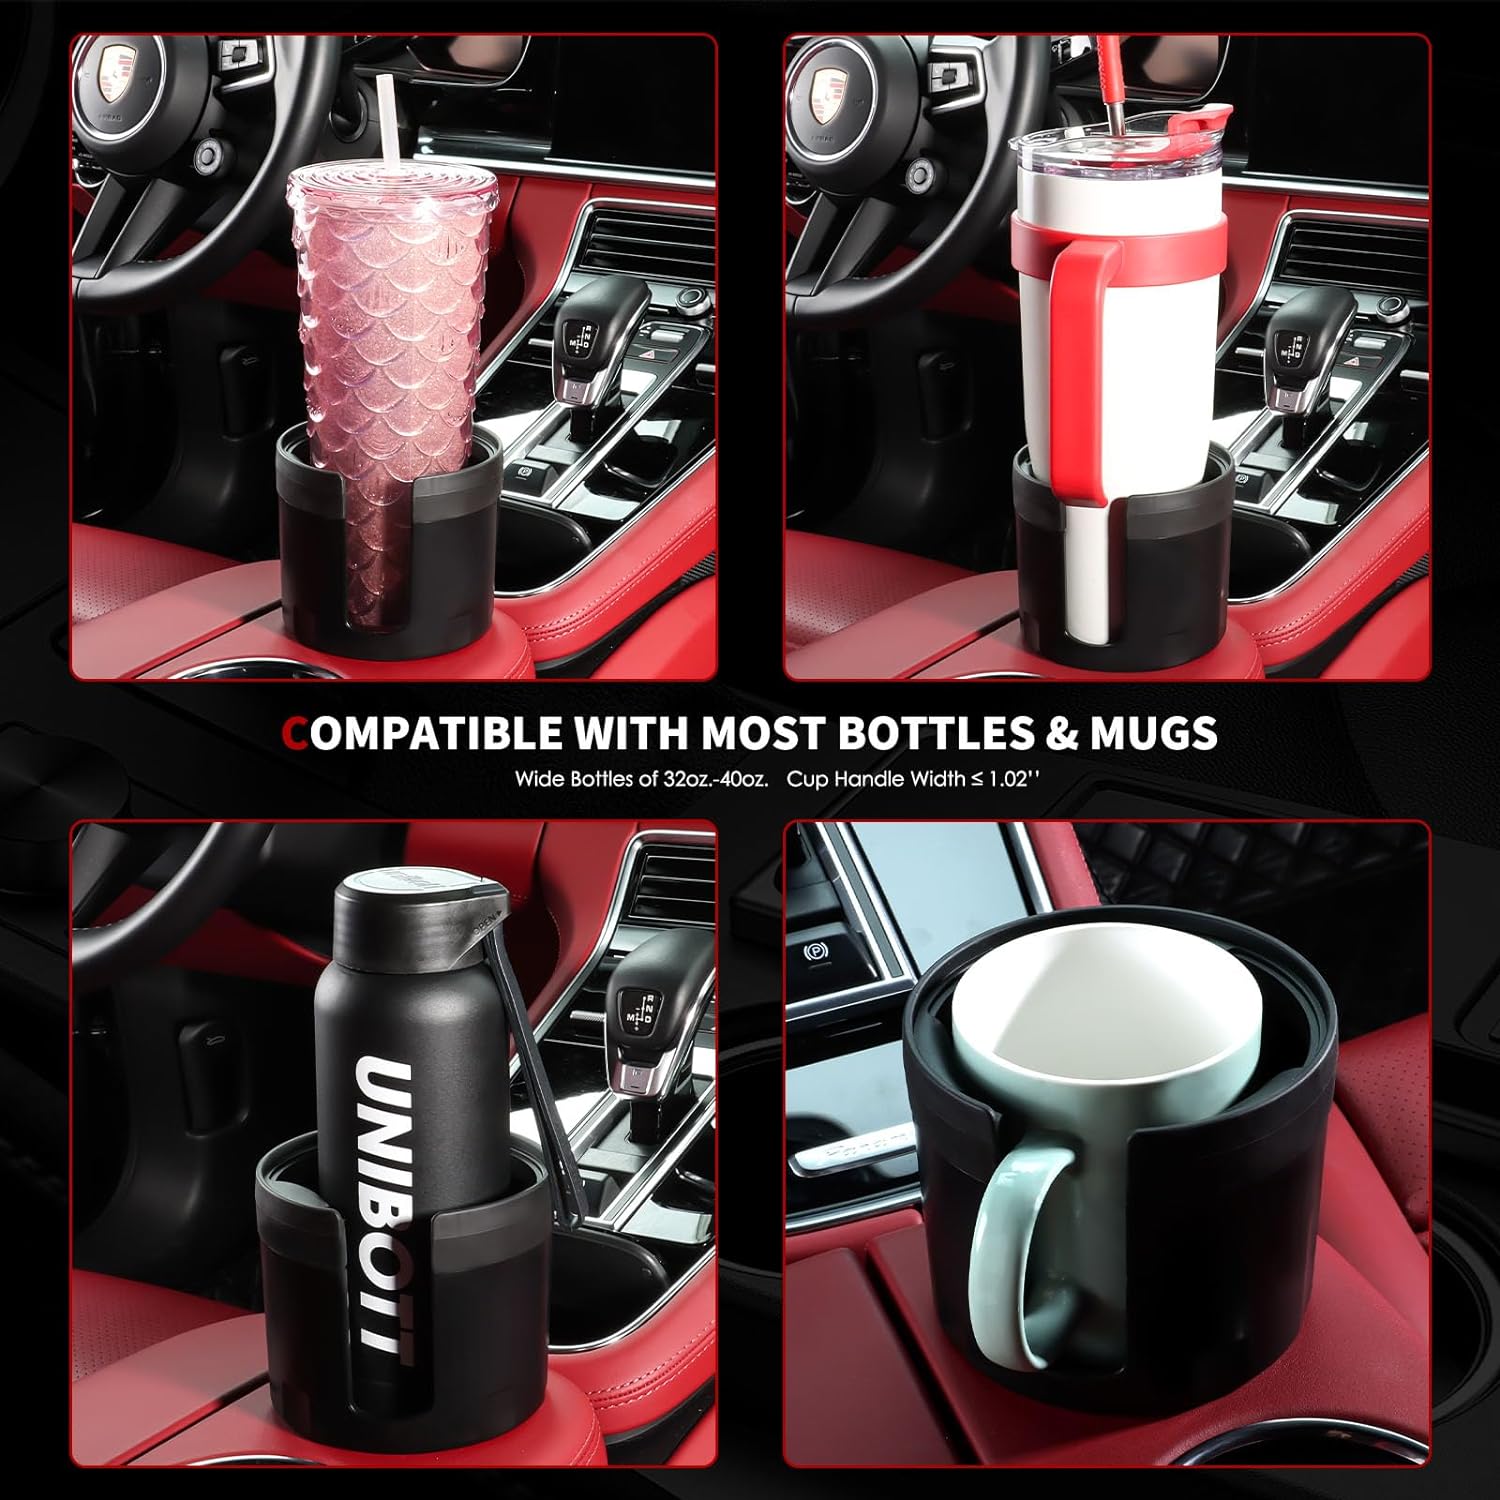 Car Cup Holder Expander Large Cup Holder Adapter For Coffee Cup